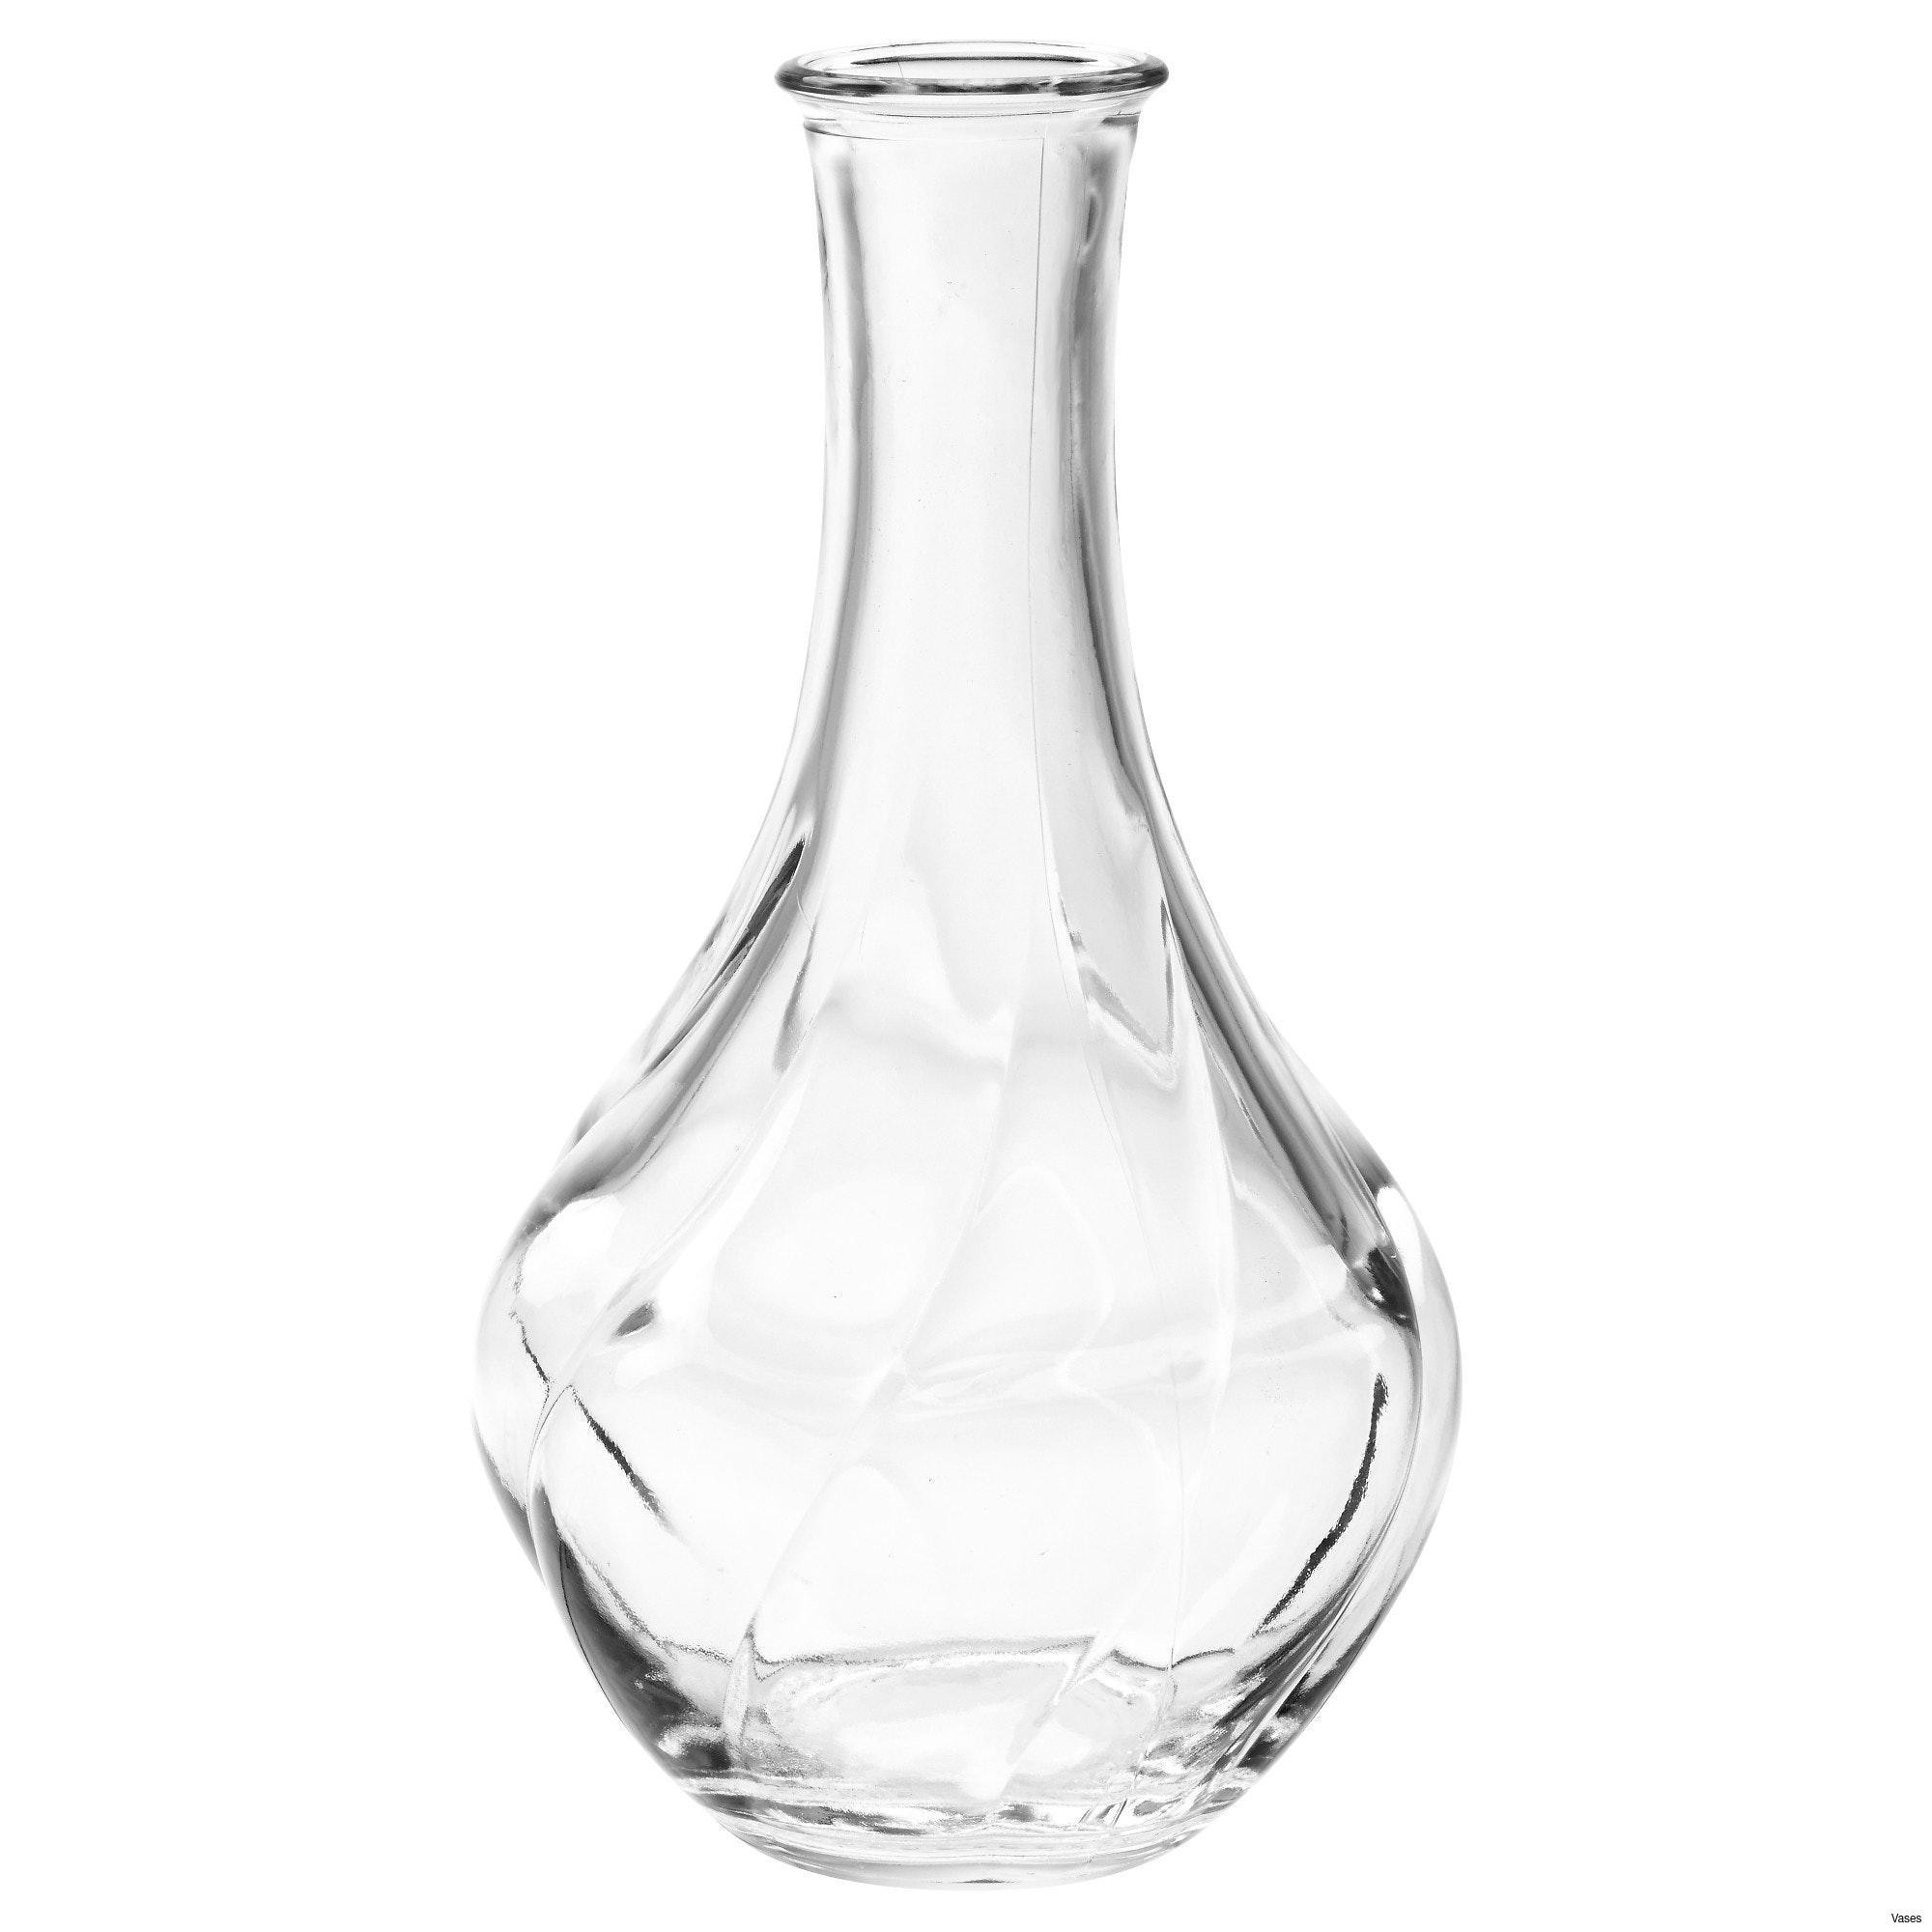 13 attractive Small Glass Vases wholesale 2024 free download small glass vases wholesale of 11 beautiful clear tall glass vases bogekompresorturkiye com with living room glass vases fresh clear vase 0d tags amazing and also white interior pattern